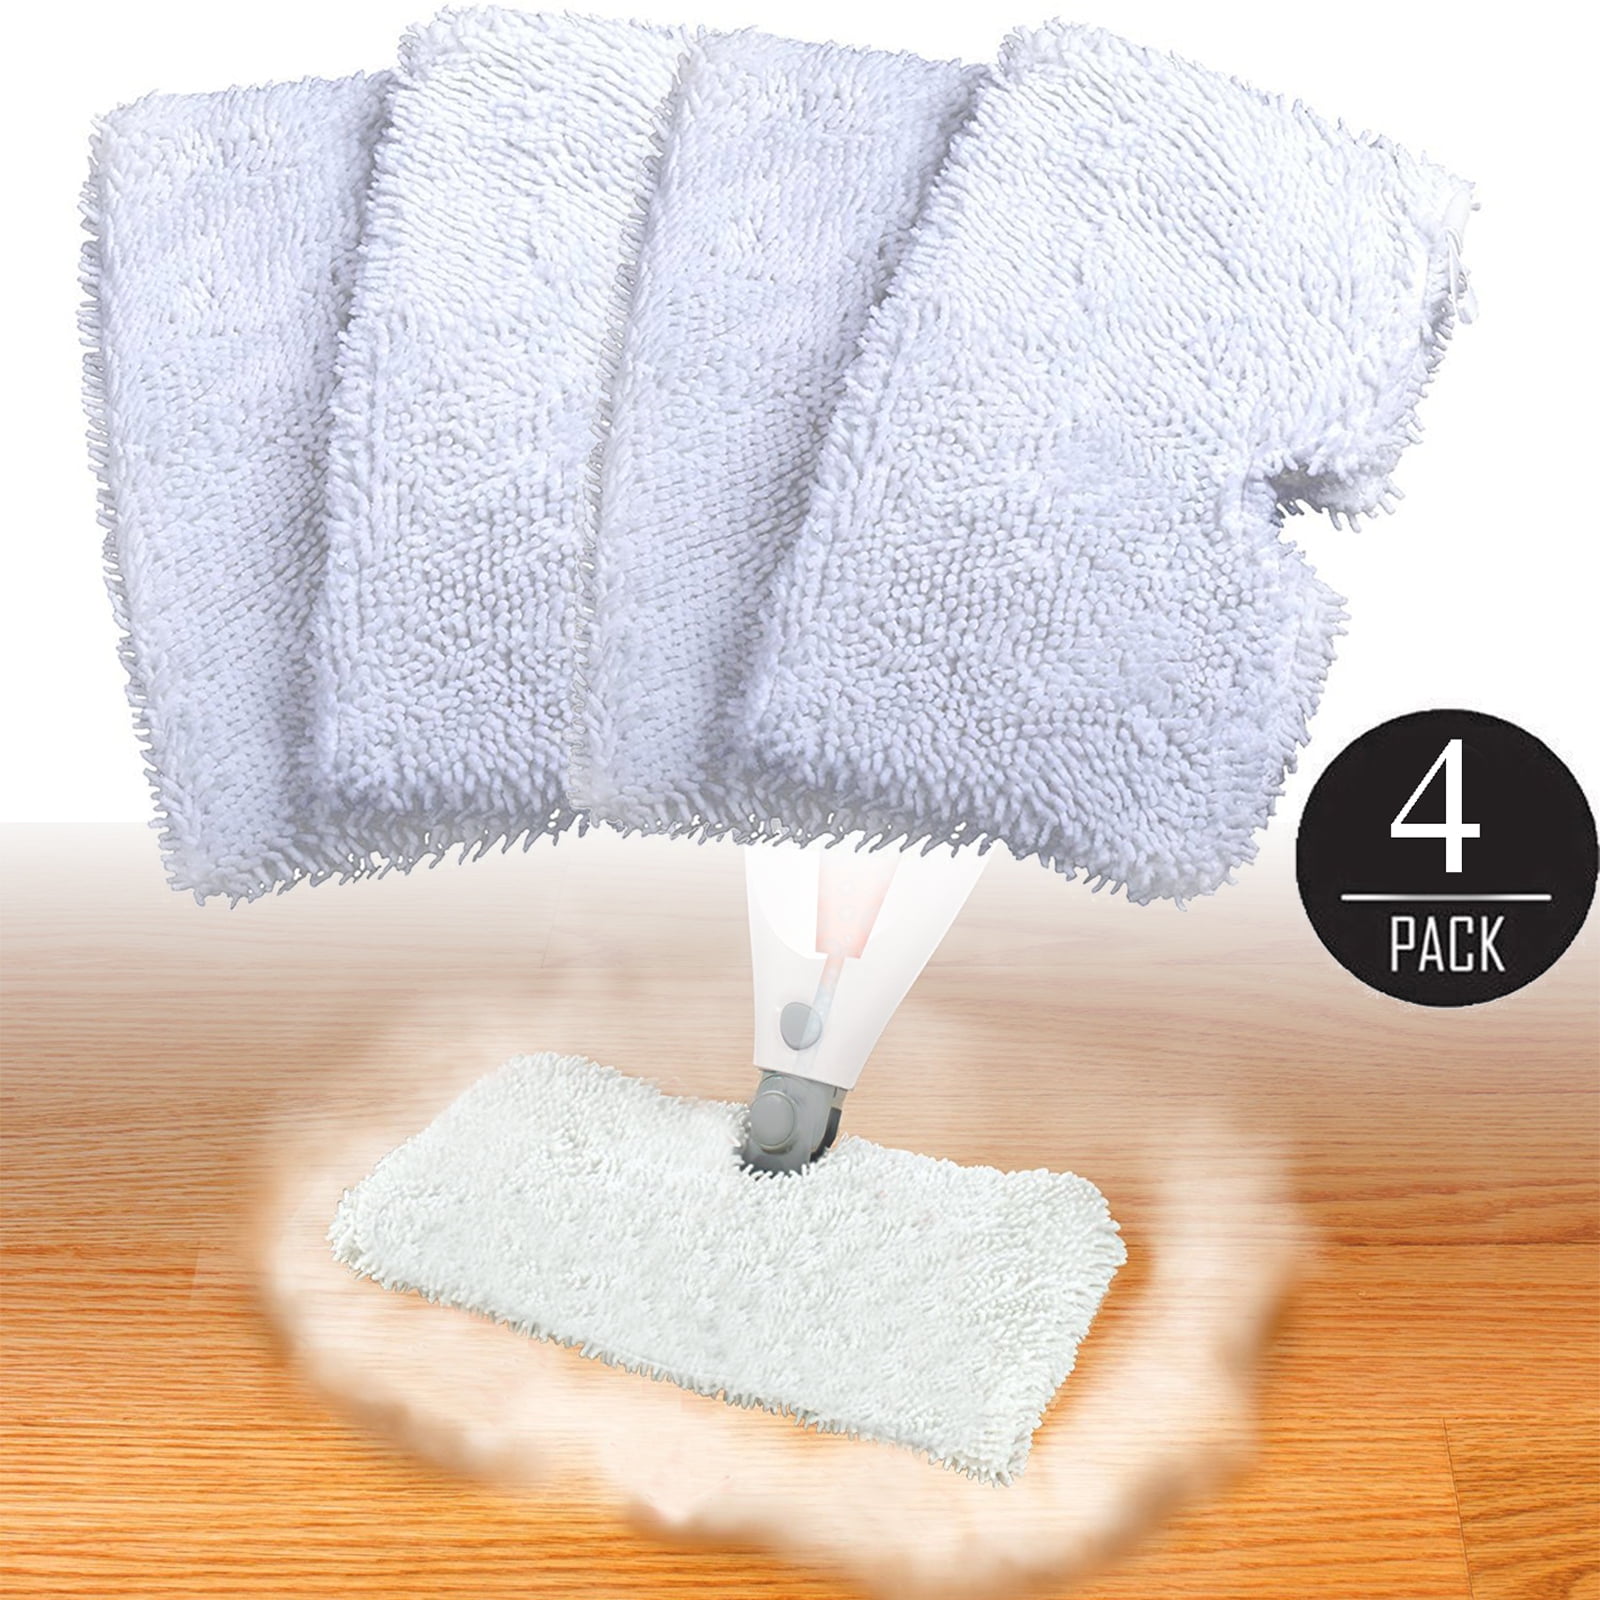 2 xWashable Replacement Cleaning Pad For Shark Steam Mop S3501 S3601 S3550 S3901 